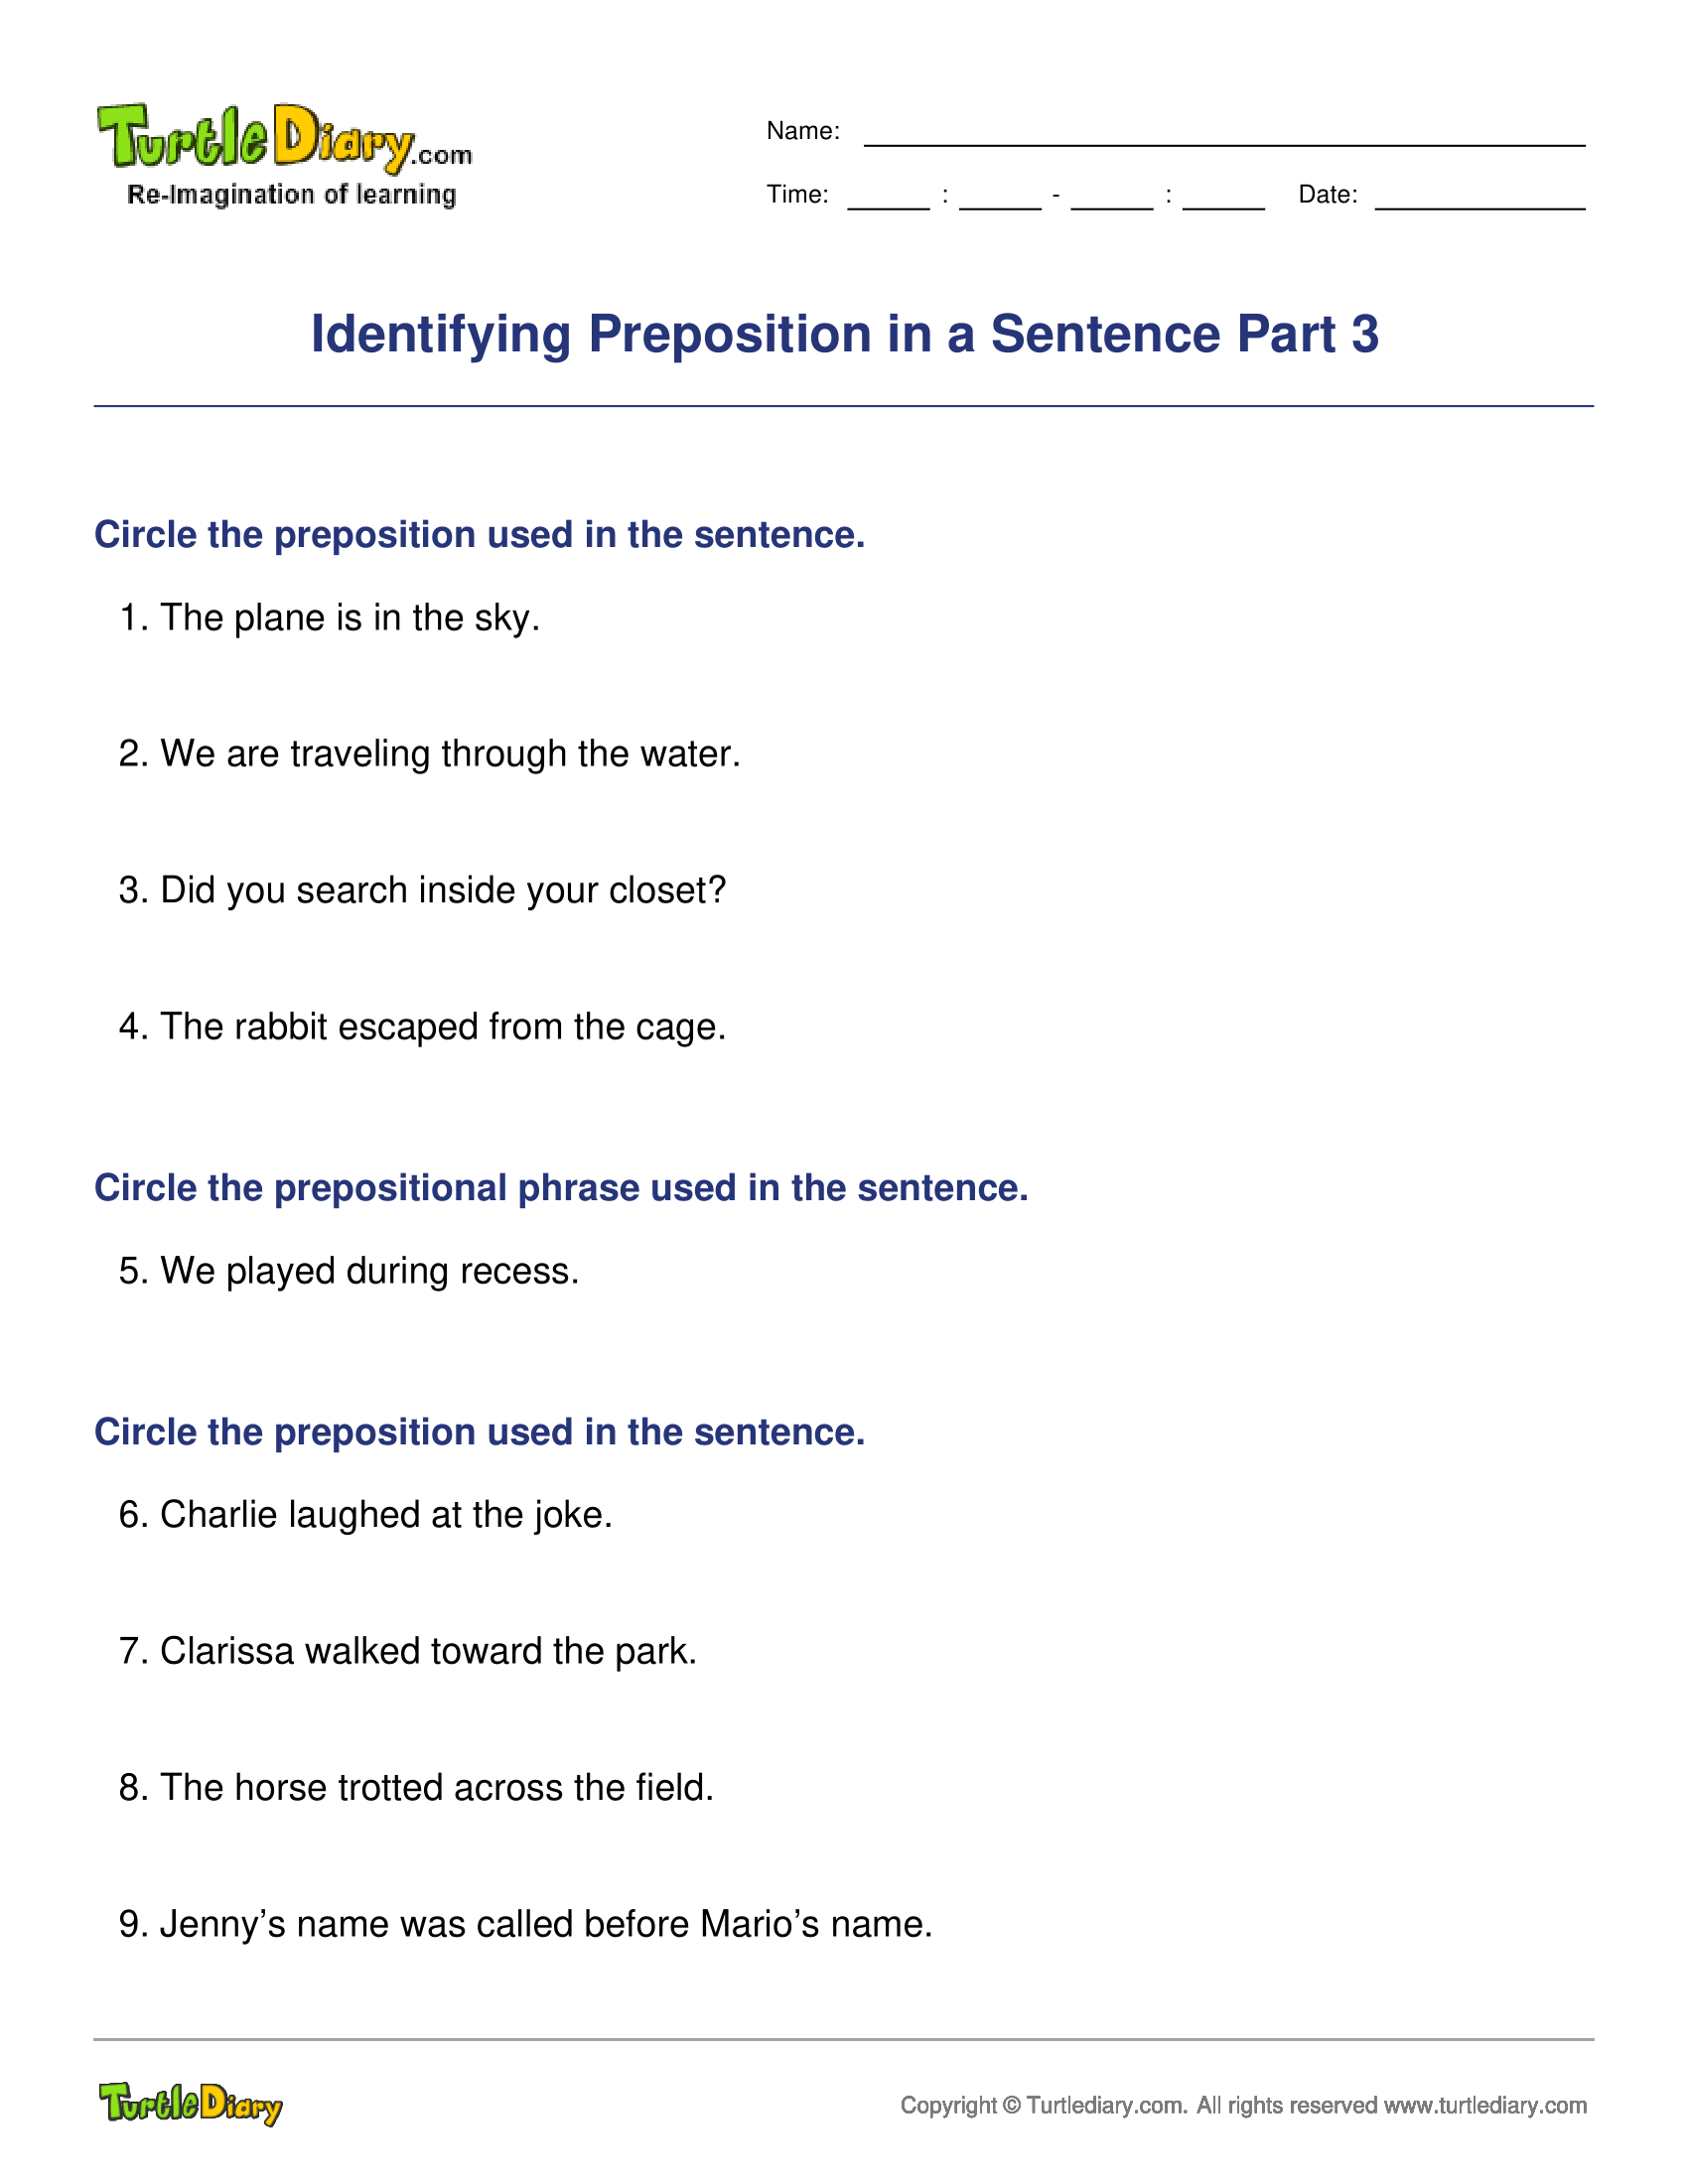 Identifying Preposition in a Sentence Part 3